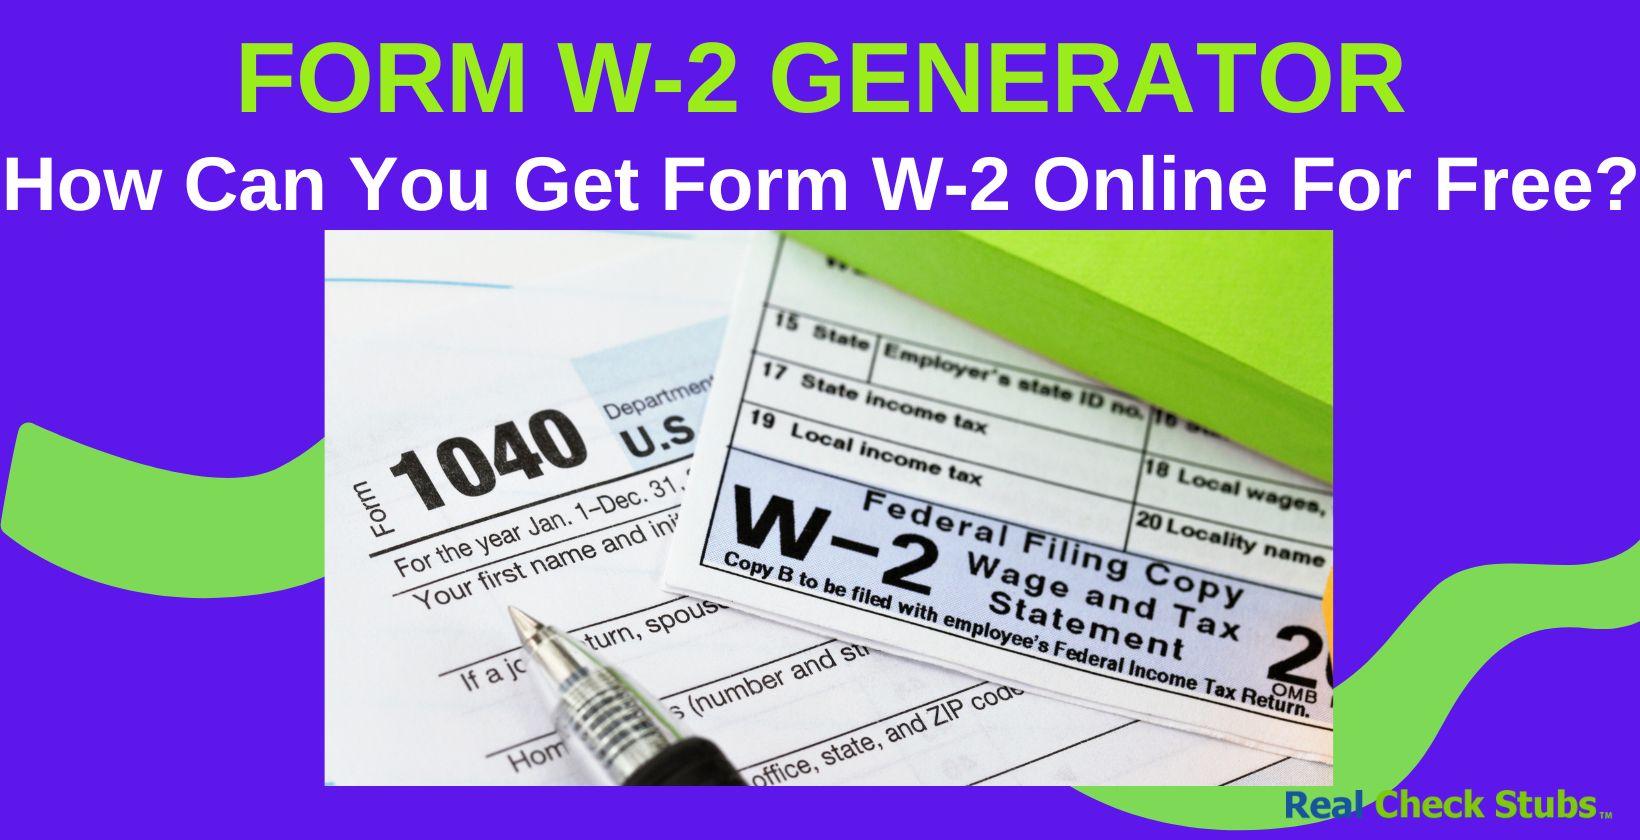 How Can You Get Form W-2 Online for Free?